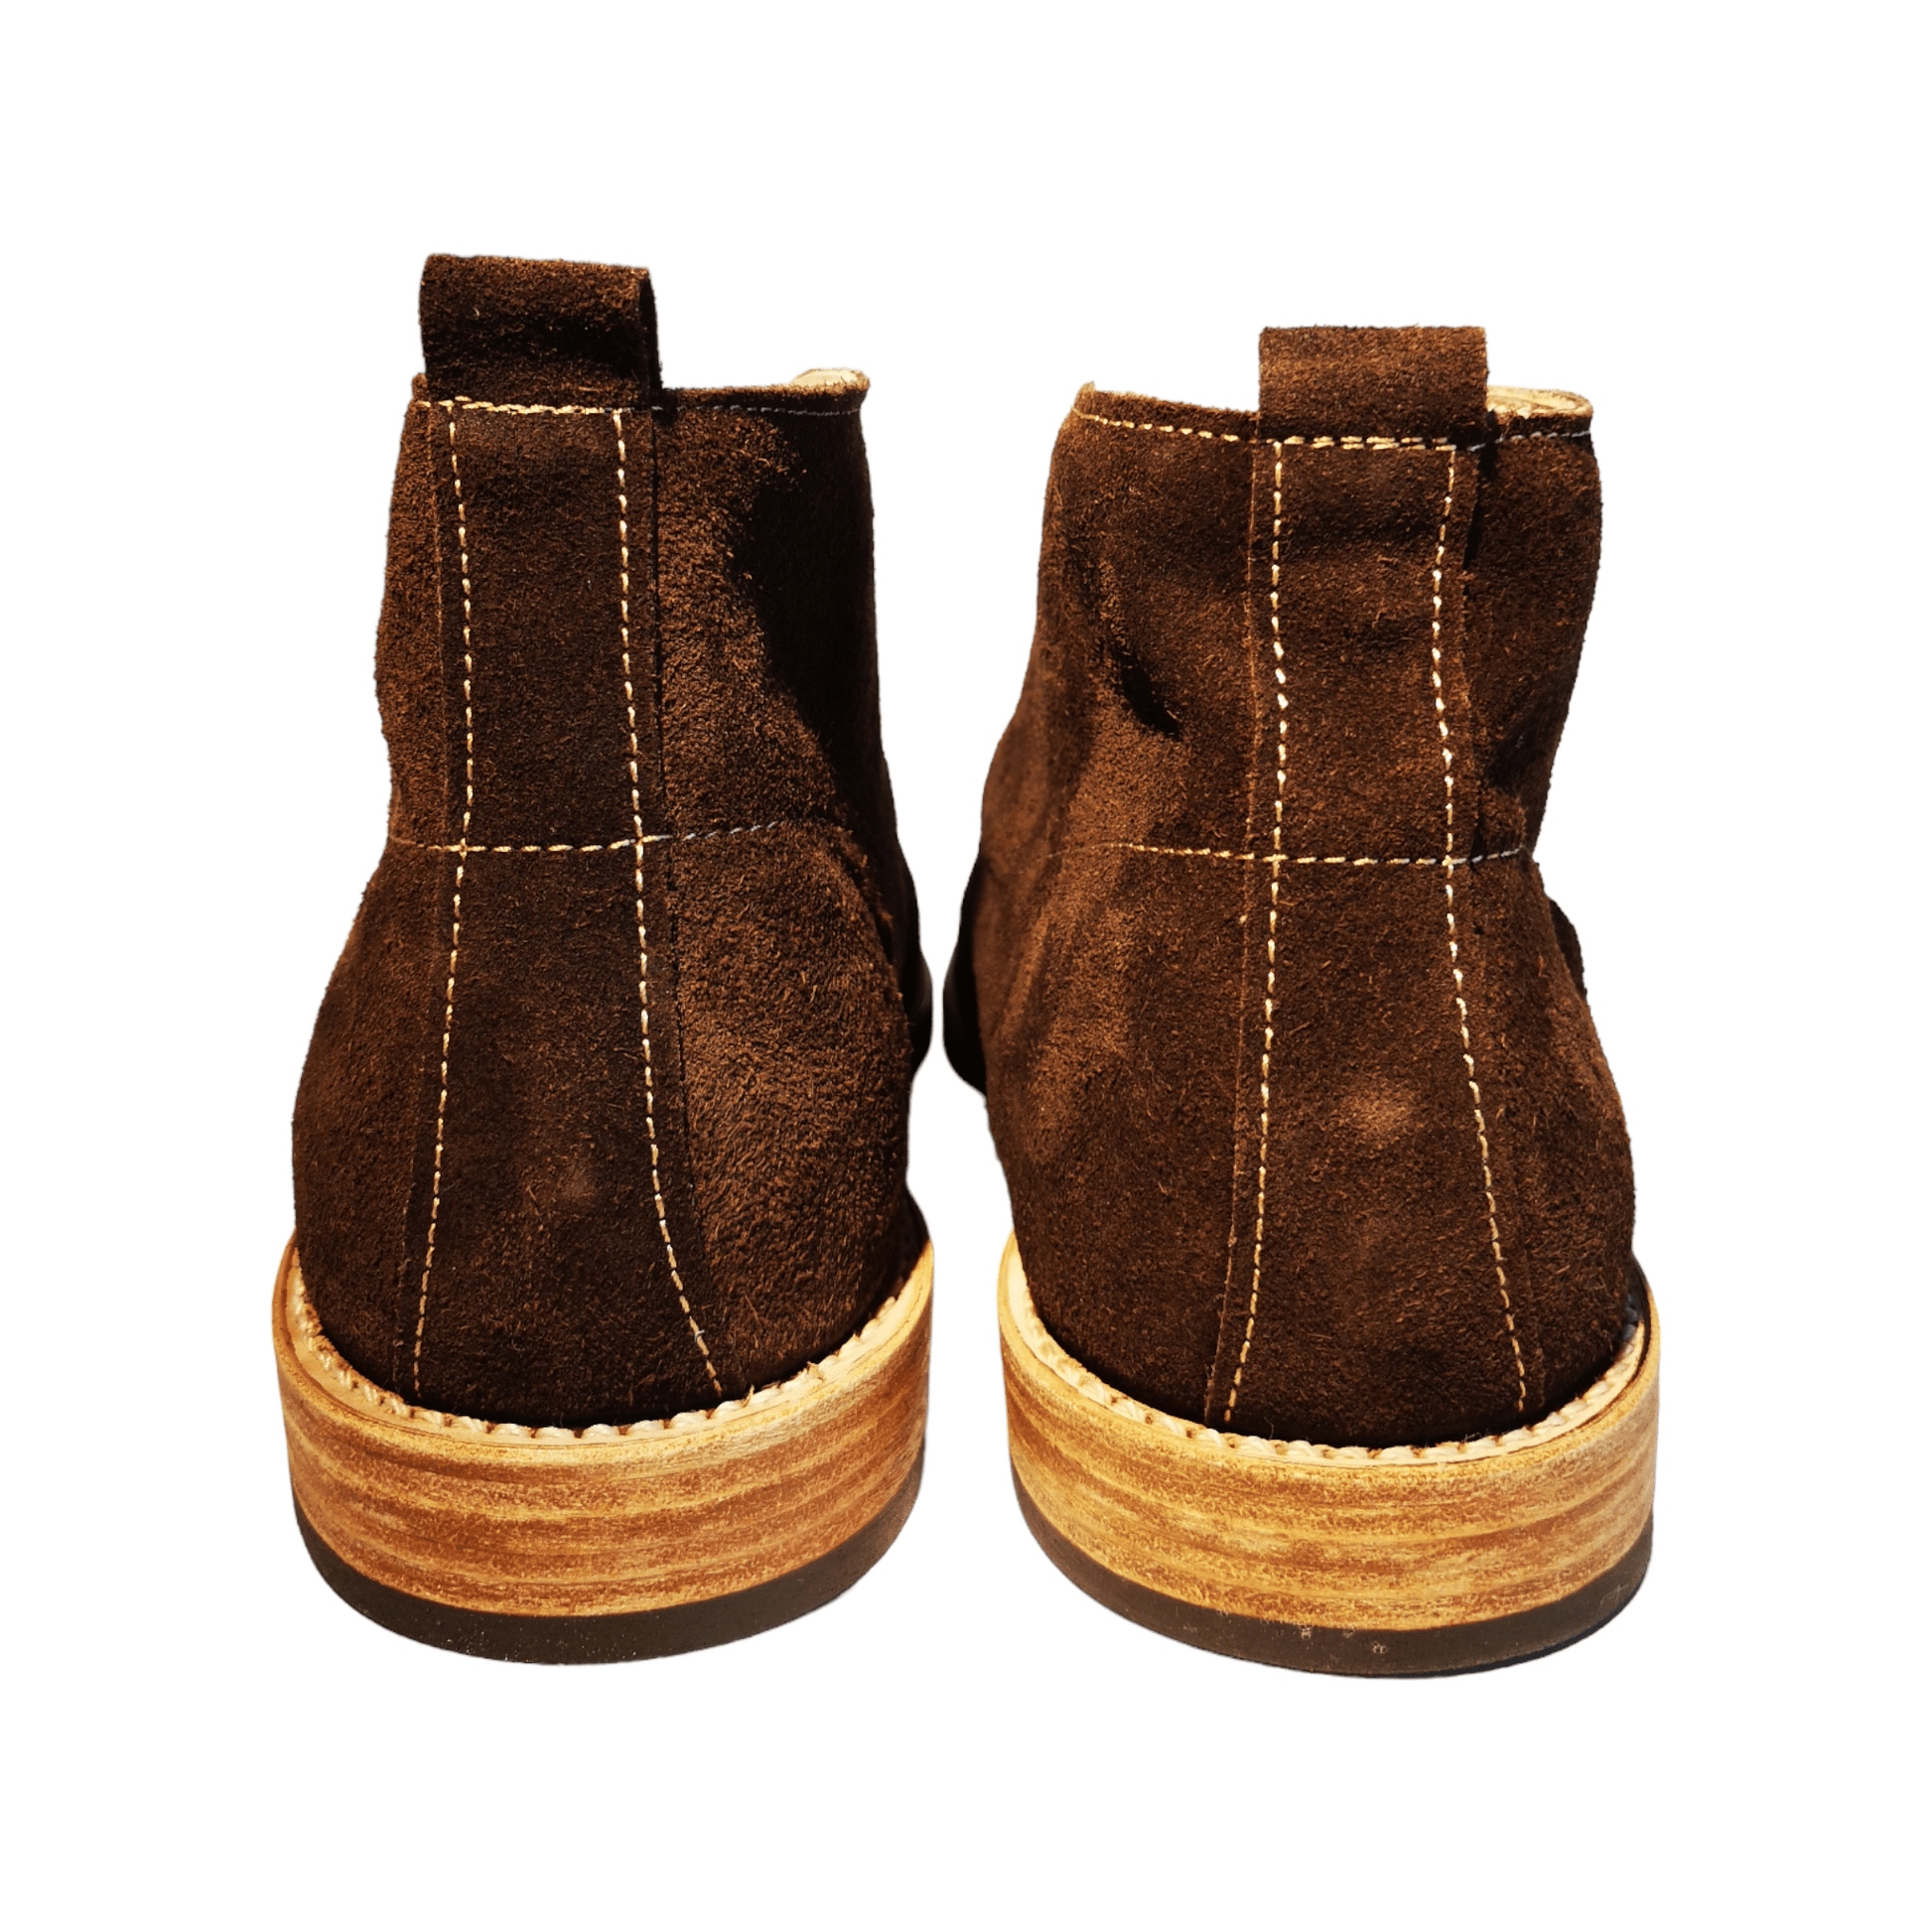 Mira Premium Boots - OldMulla - Boots Store, Handmade By George Family